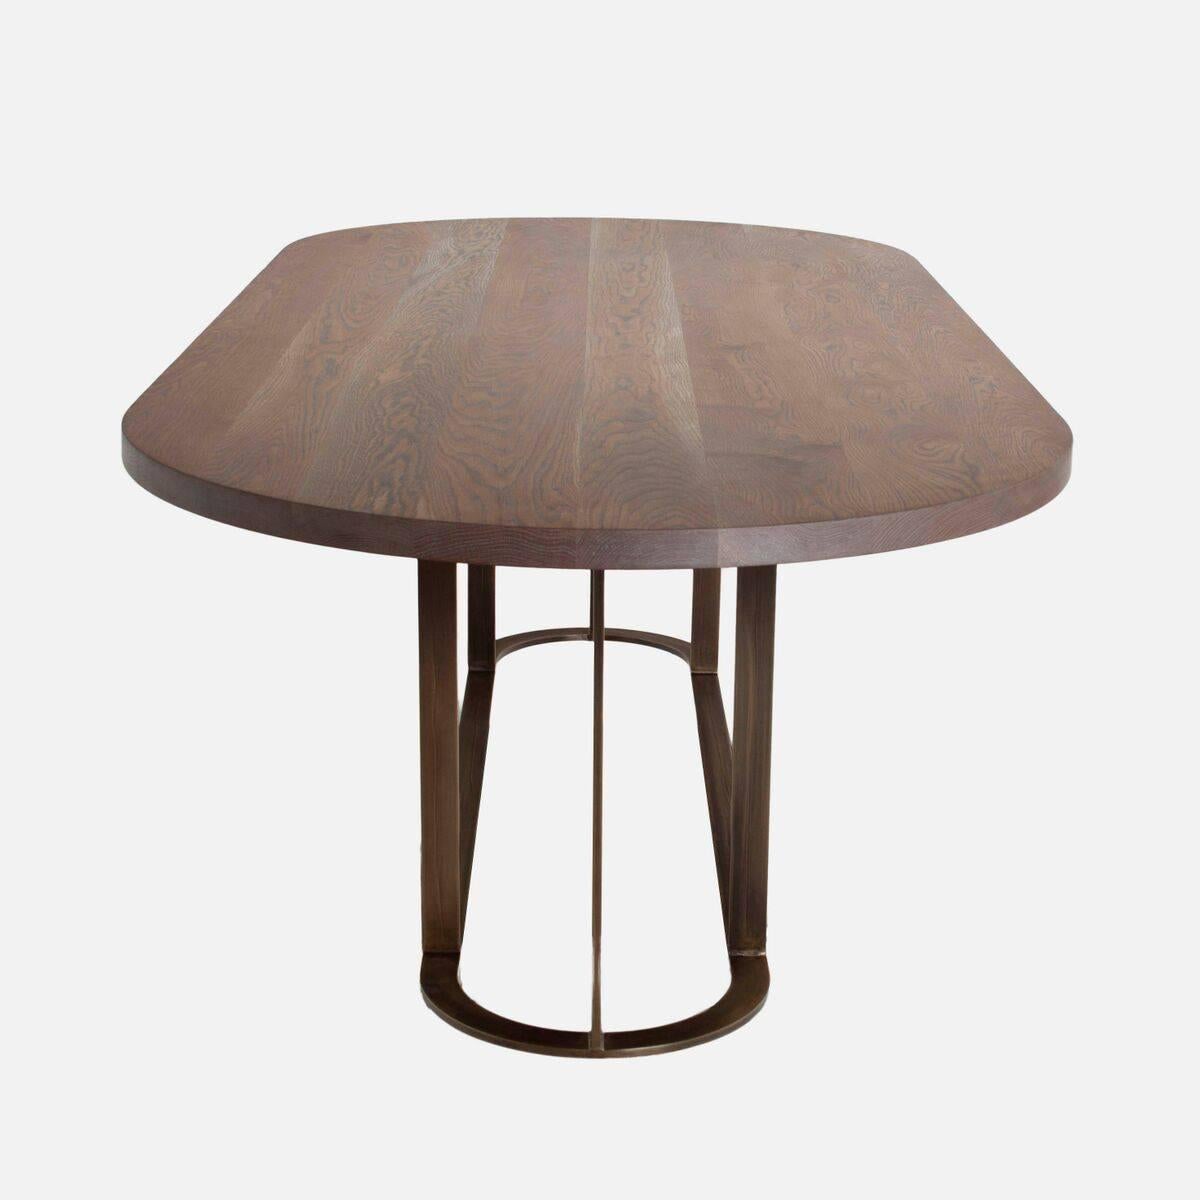 A custom dining table consisting of a structural metal base and a solid figural wood top in a variety of finishes. See the finish options in the last image. 

Standard Dimensions: 102”W x 44”D x 30”H

Lead Time 10 - 12 weeks

Base options: steel or